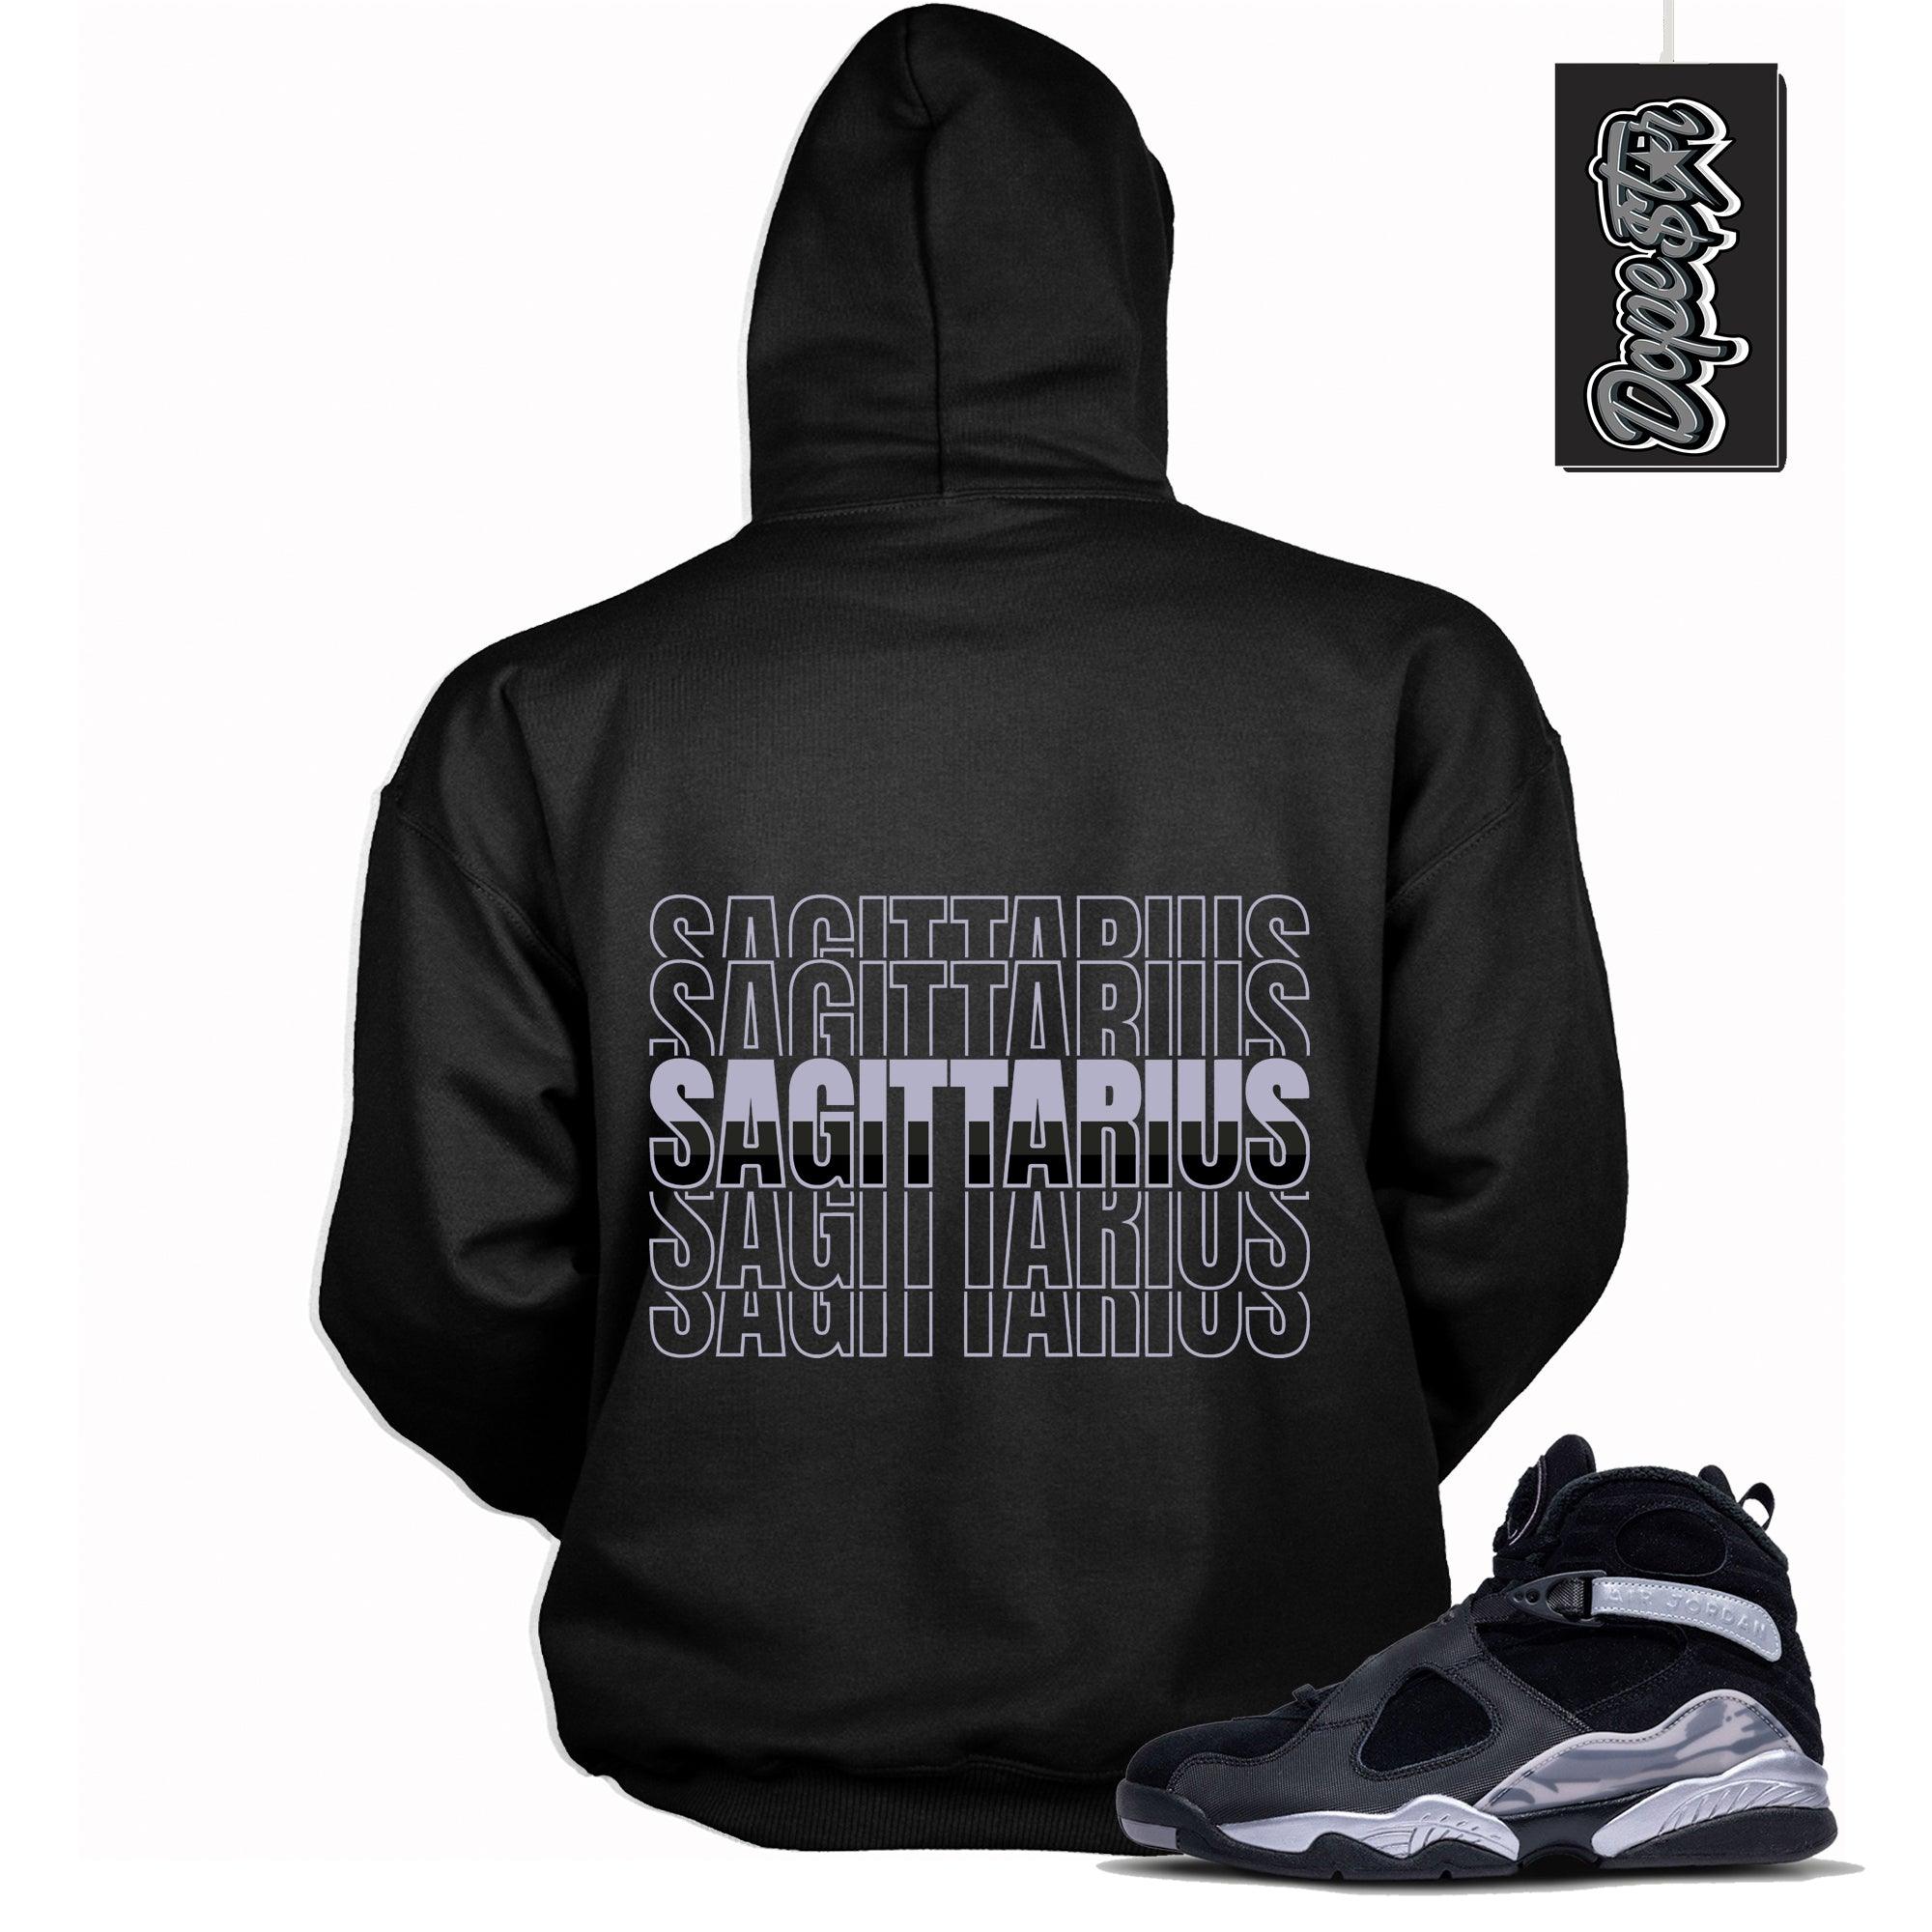 Cool Black Graphic Hoodie with “ Sagittarius “ print, that perfectly matches Air Jordan 8 Winterized  sneakers